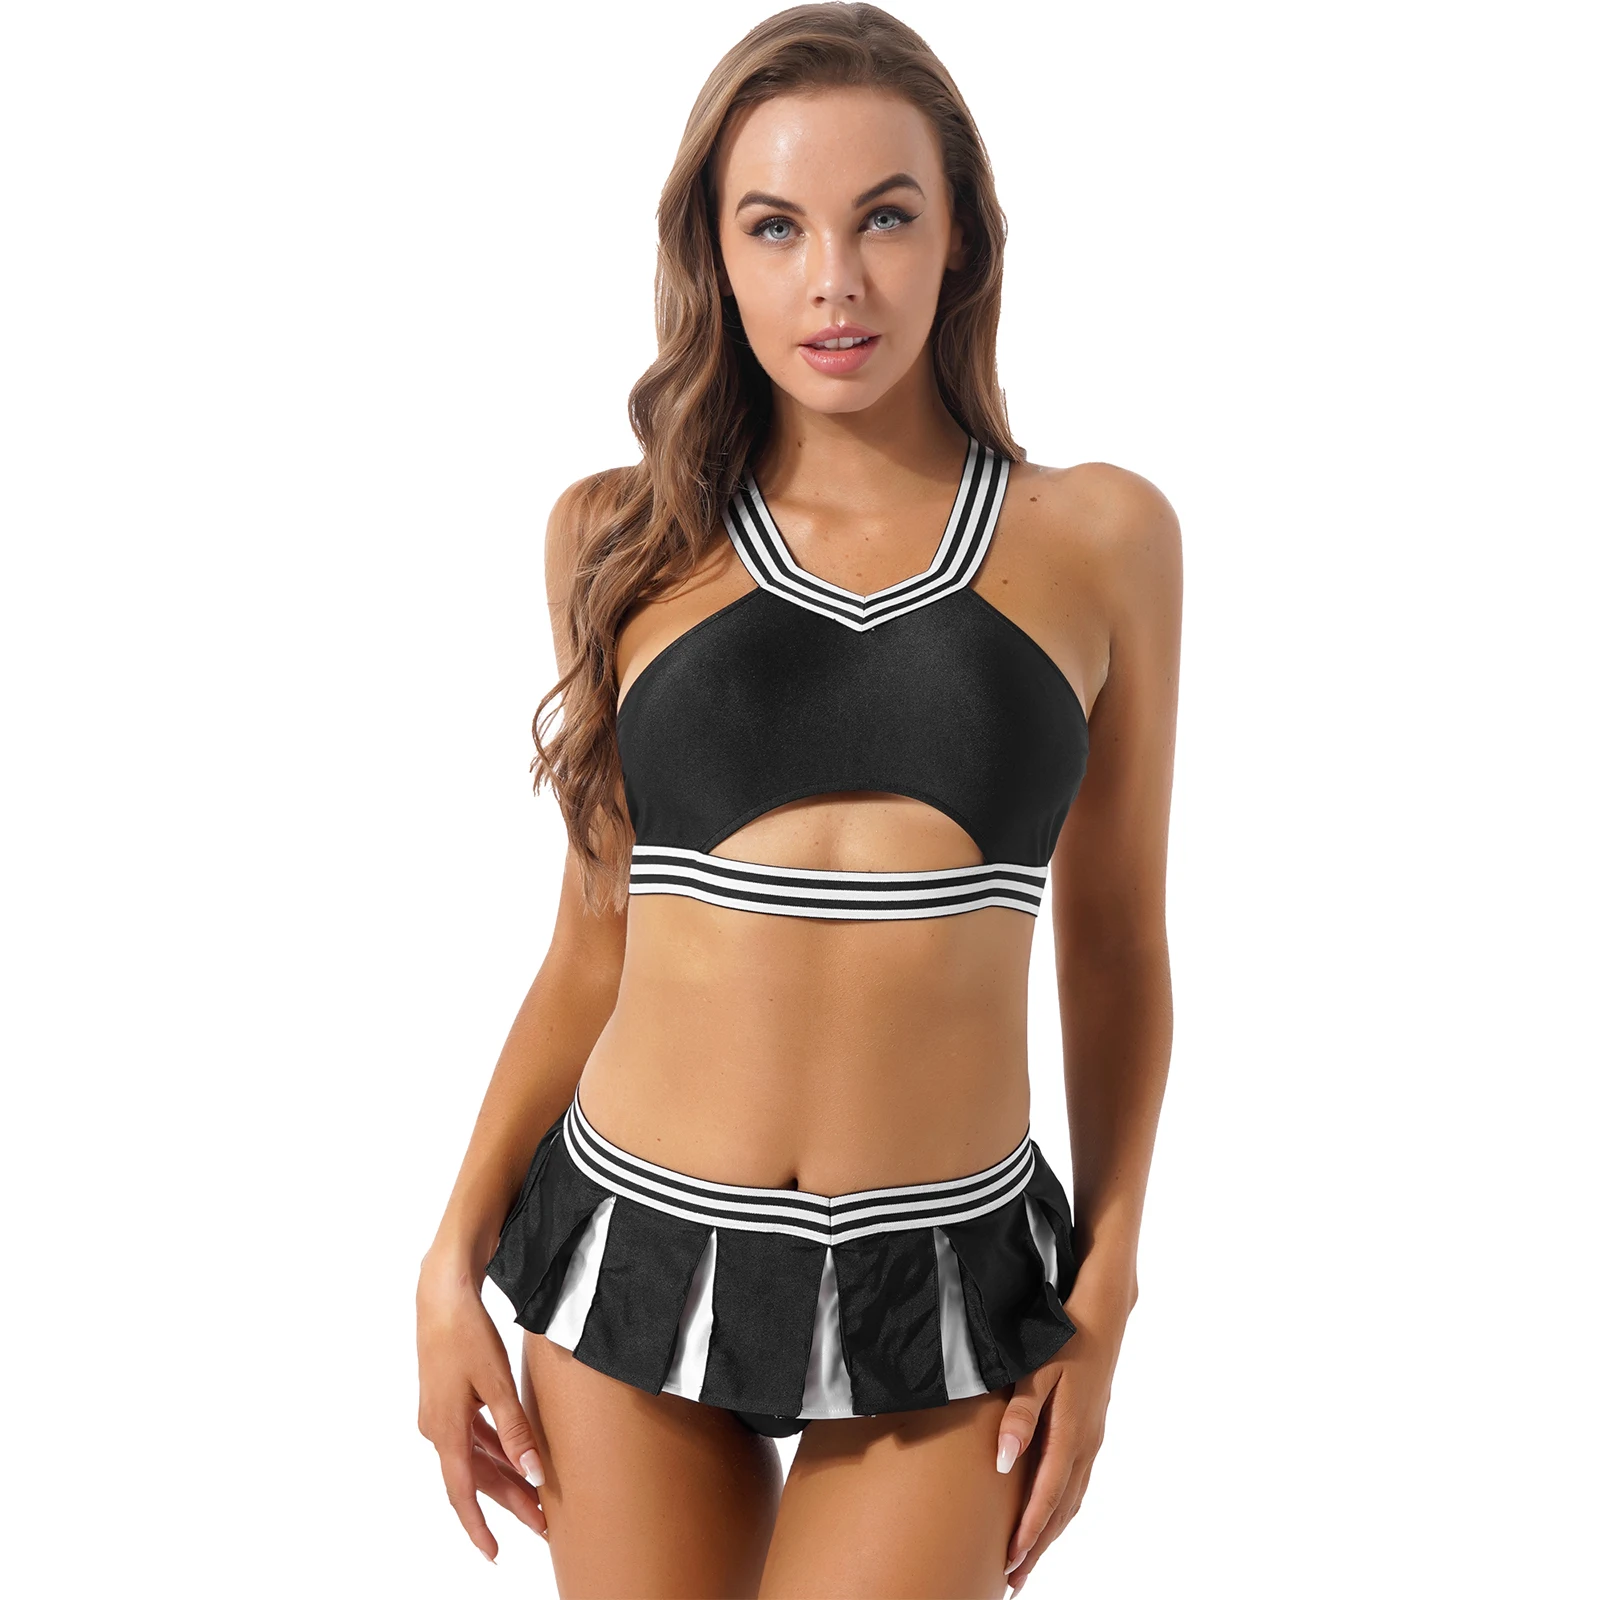 Women Cheerleading Costumes Sexy Lingerie Role Play Outfits Crop Top+ Pleat...